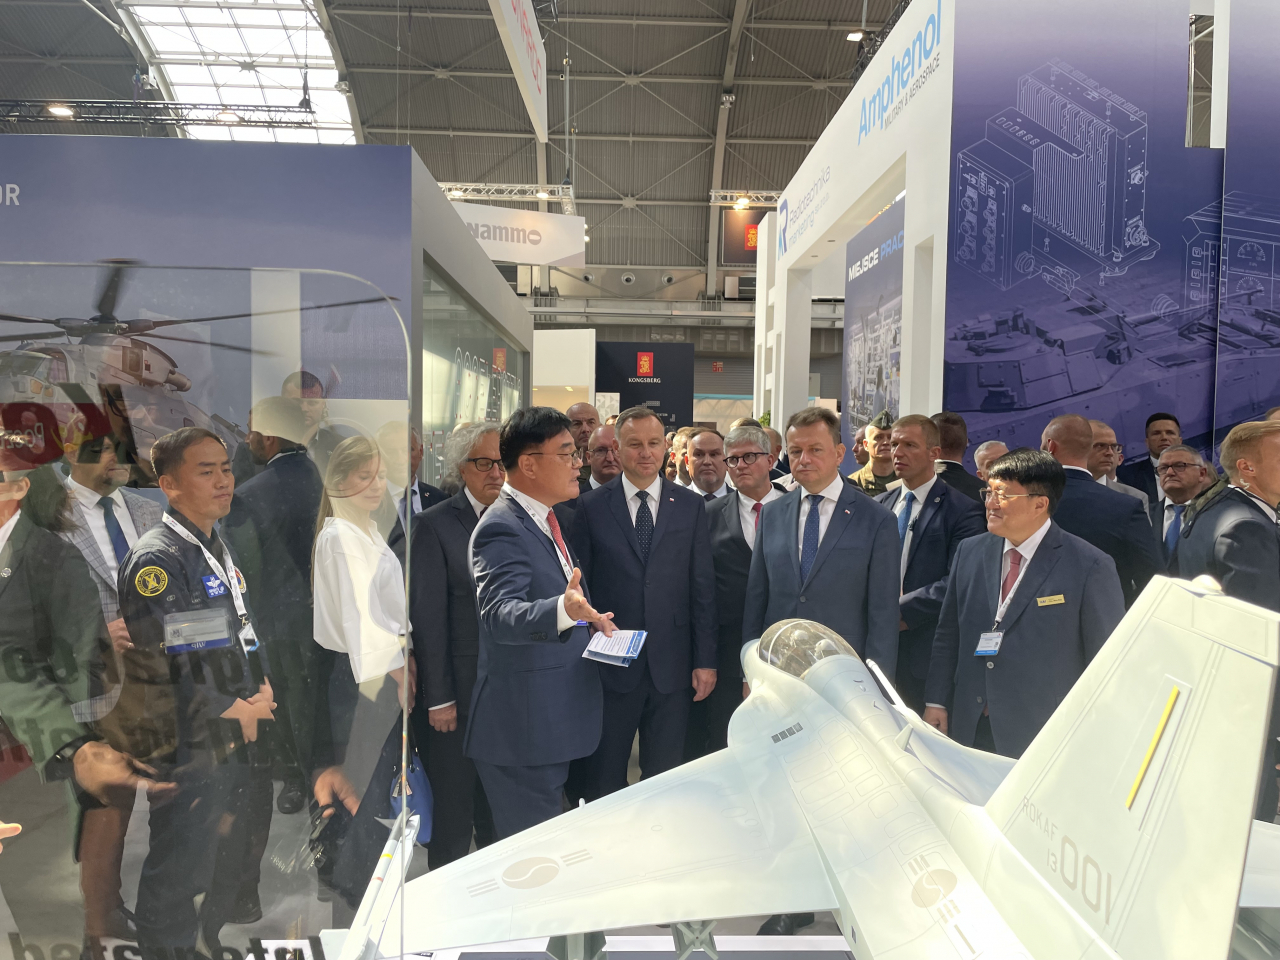 Polish President Andrzej Duda (2nd from right) listens to explanations from KAI executive Lee Bong-geun (4th from right) of the South Korean aircraft manufacturer's FA-50 fighter jet at the 30th International Defence Industry Exhibition in Poland. (KAI-Yonhap)